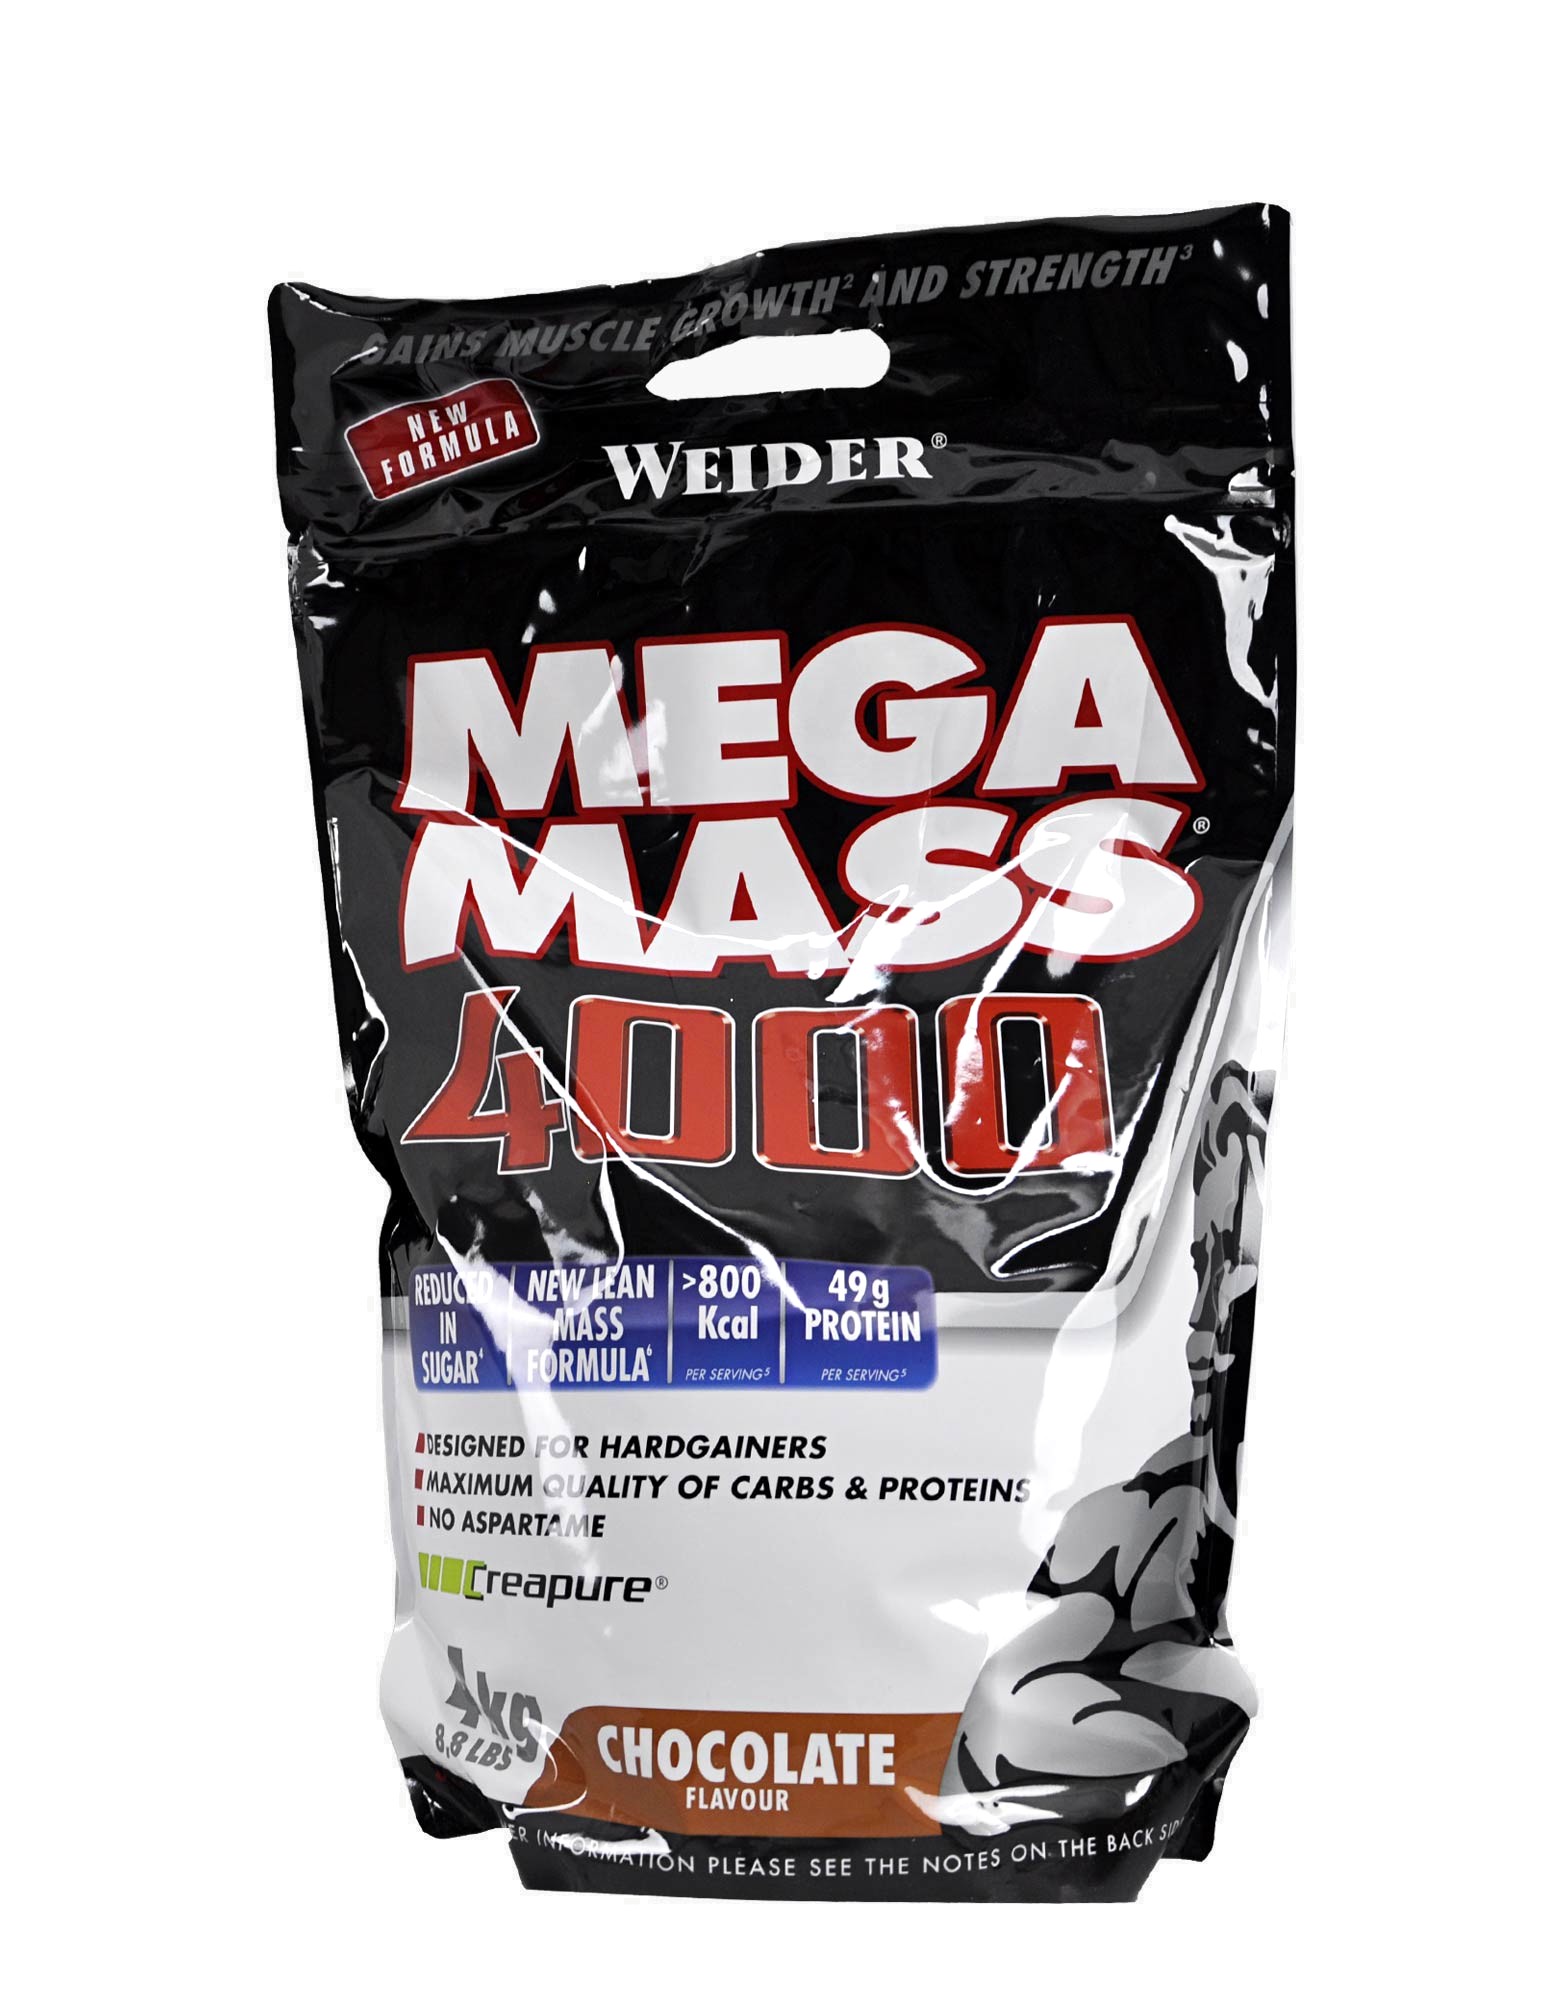 The Weider Mega Mass 4000 g is now available at our stores